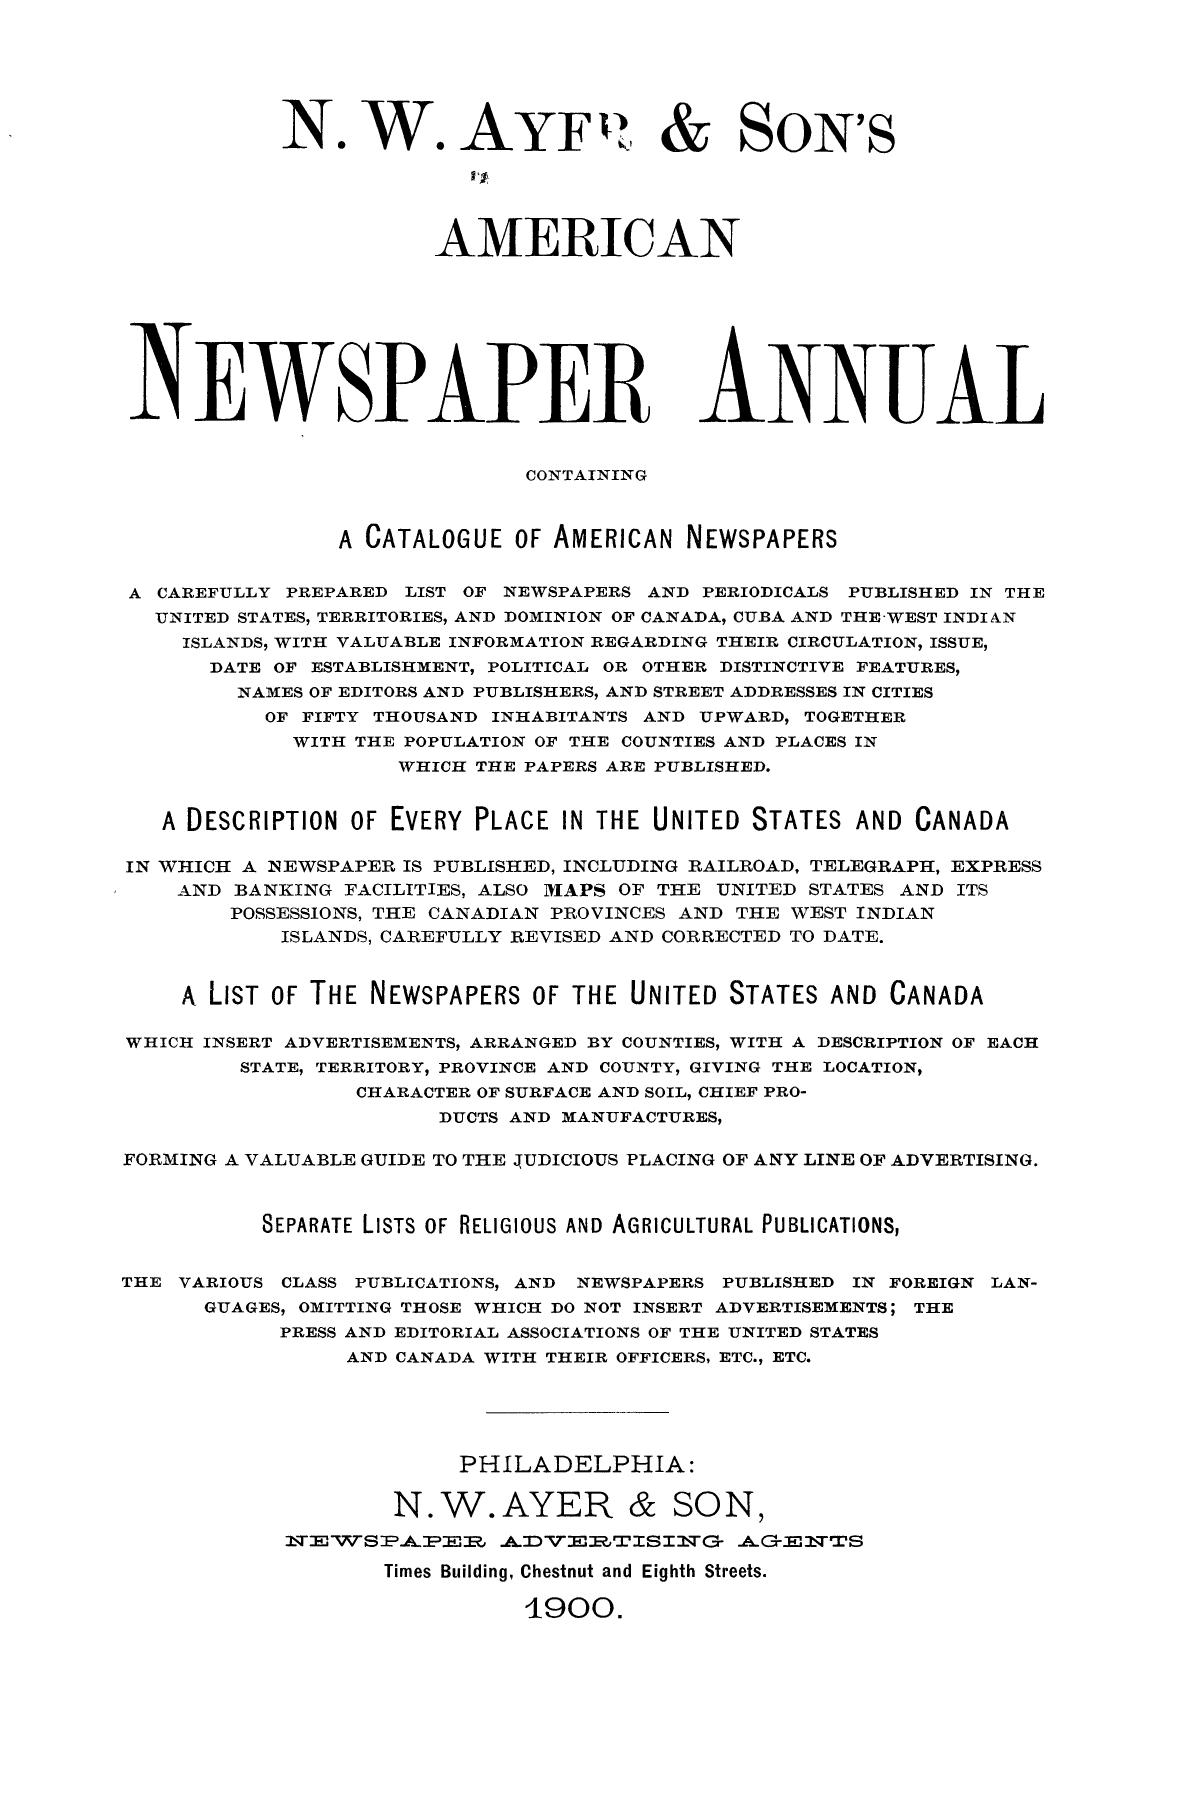 N. W. Ayer & Son's American Newspaper Annual: containing a Catalogue of American Newspapers, a List of All Newspapers of the United States and Canada, 1900, Volume 1
                                                
                                                    Title Page
                                                